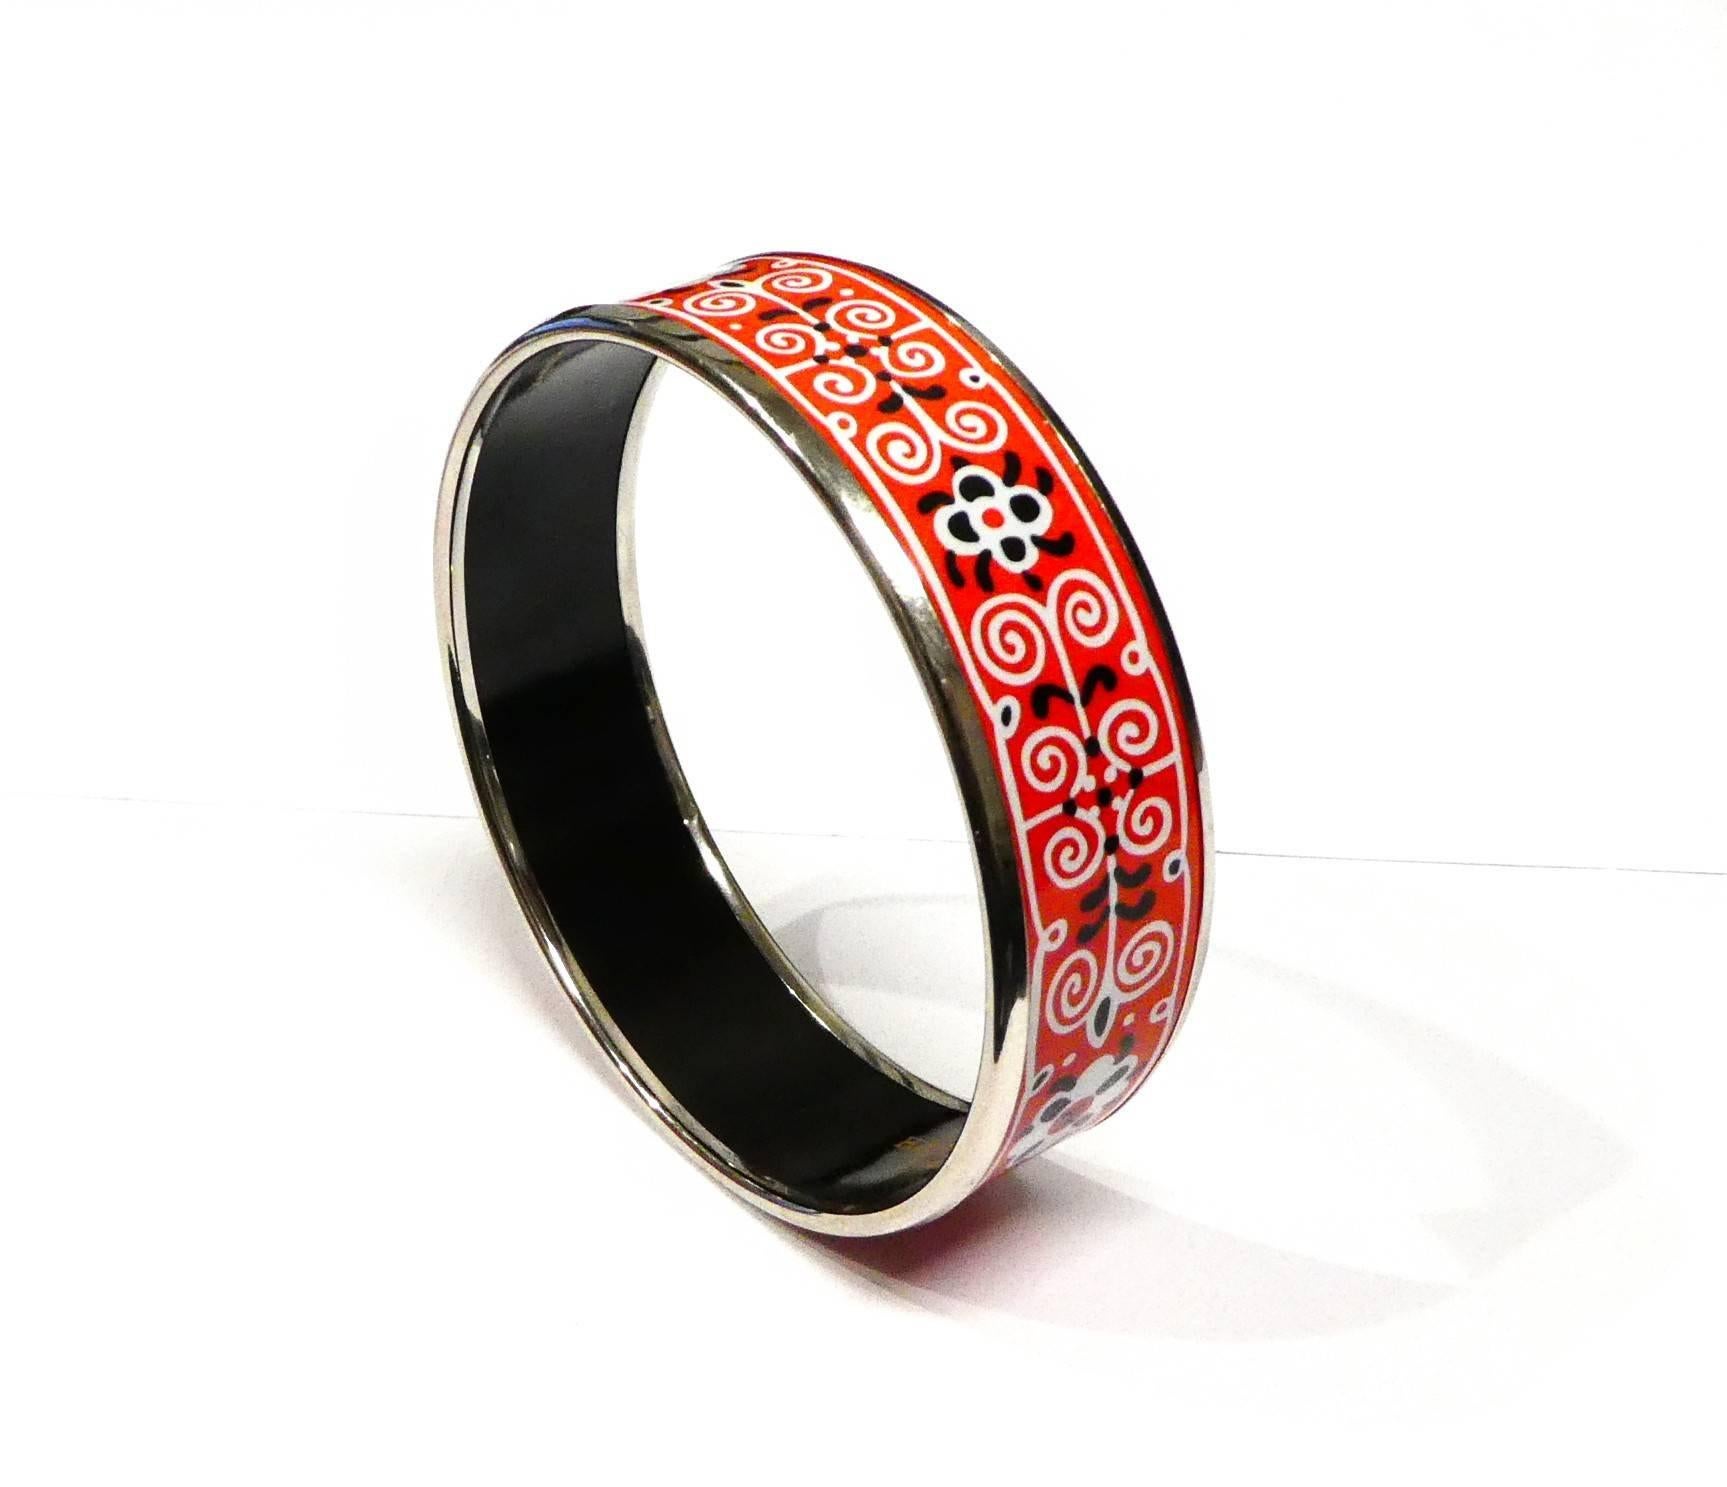 For sale we have a Hermes Bagle Bracelet with a red, black, and white floral motif design. This bracelet is Palladium-Plated with the design in Enamel. We estimate this piece fits a 6 inch wrist and may feel tight because of it's thickness of